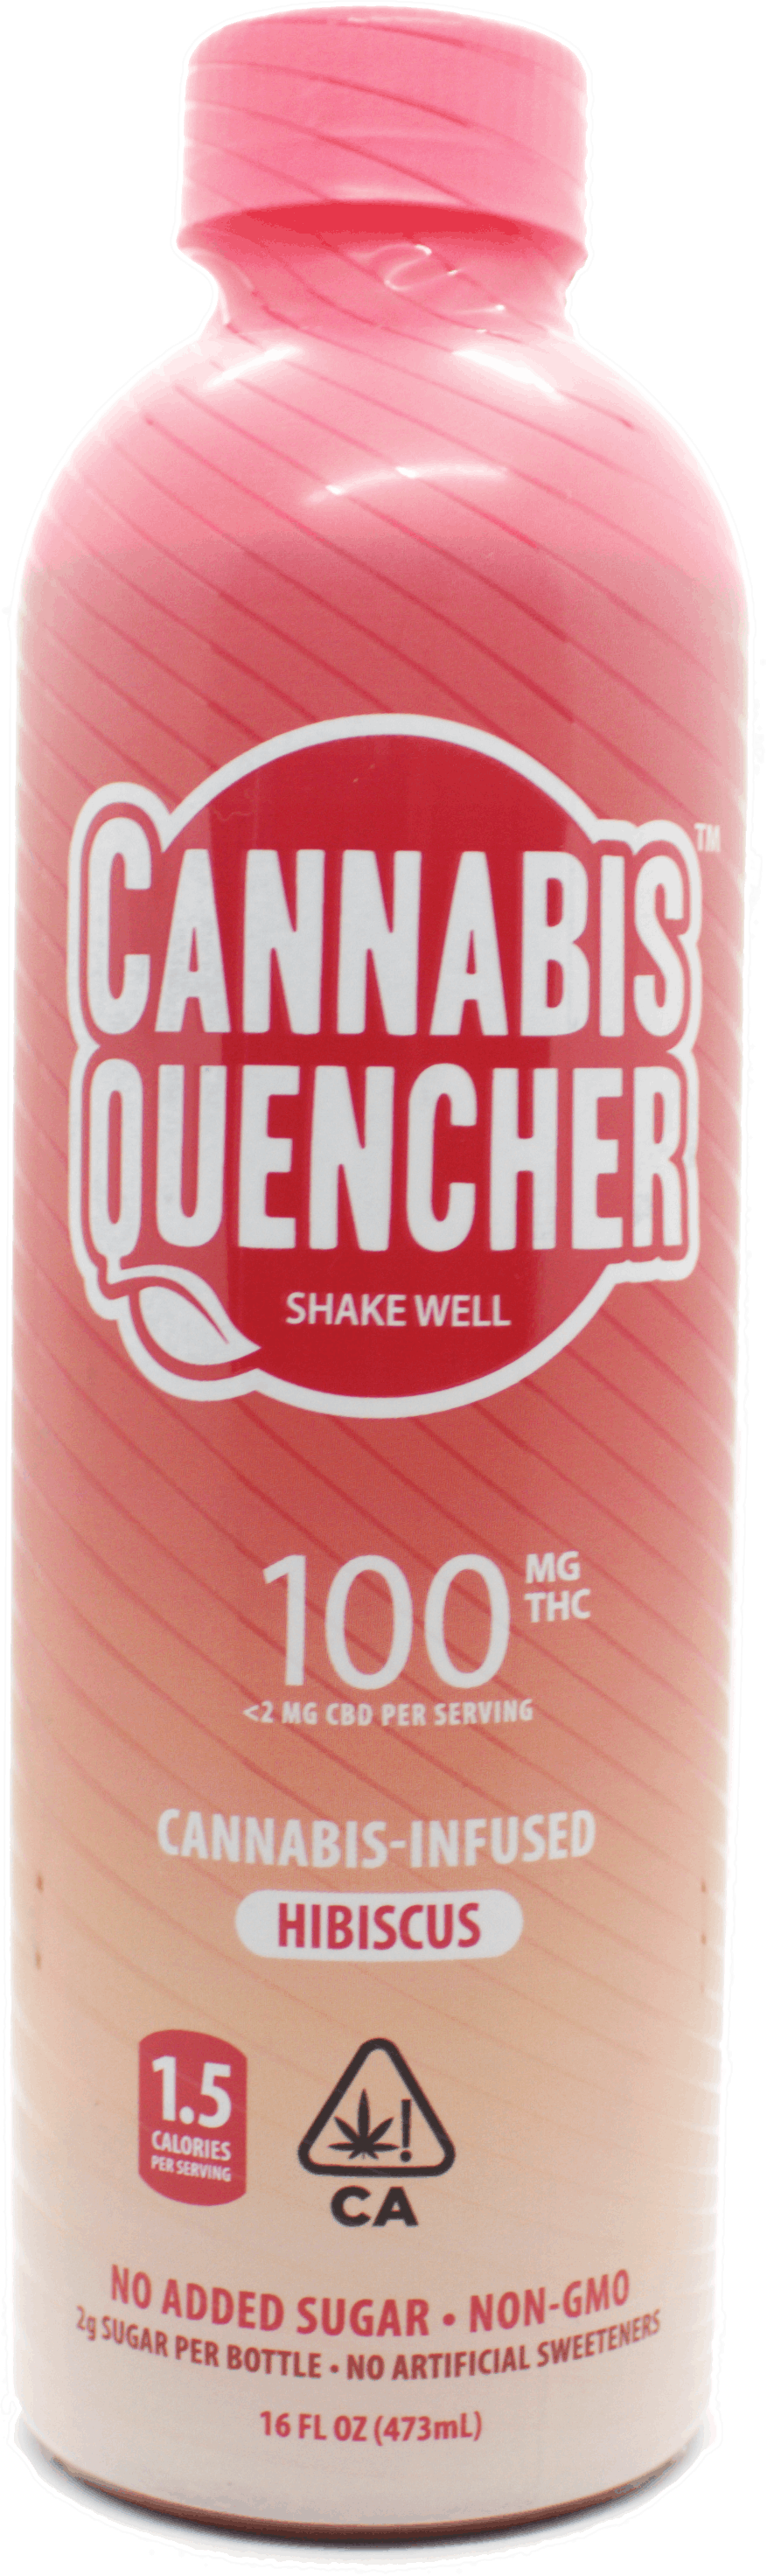 drink-venice-cookie-company-cannabis-quencher-hibiscus